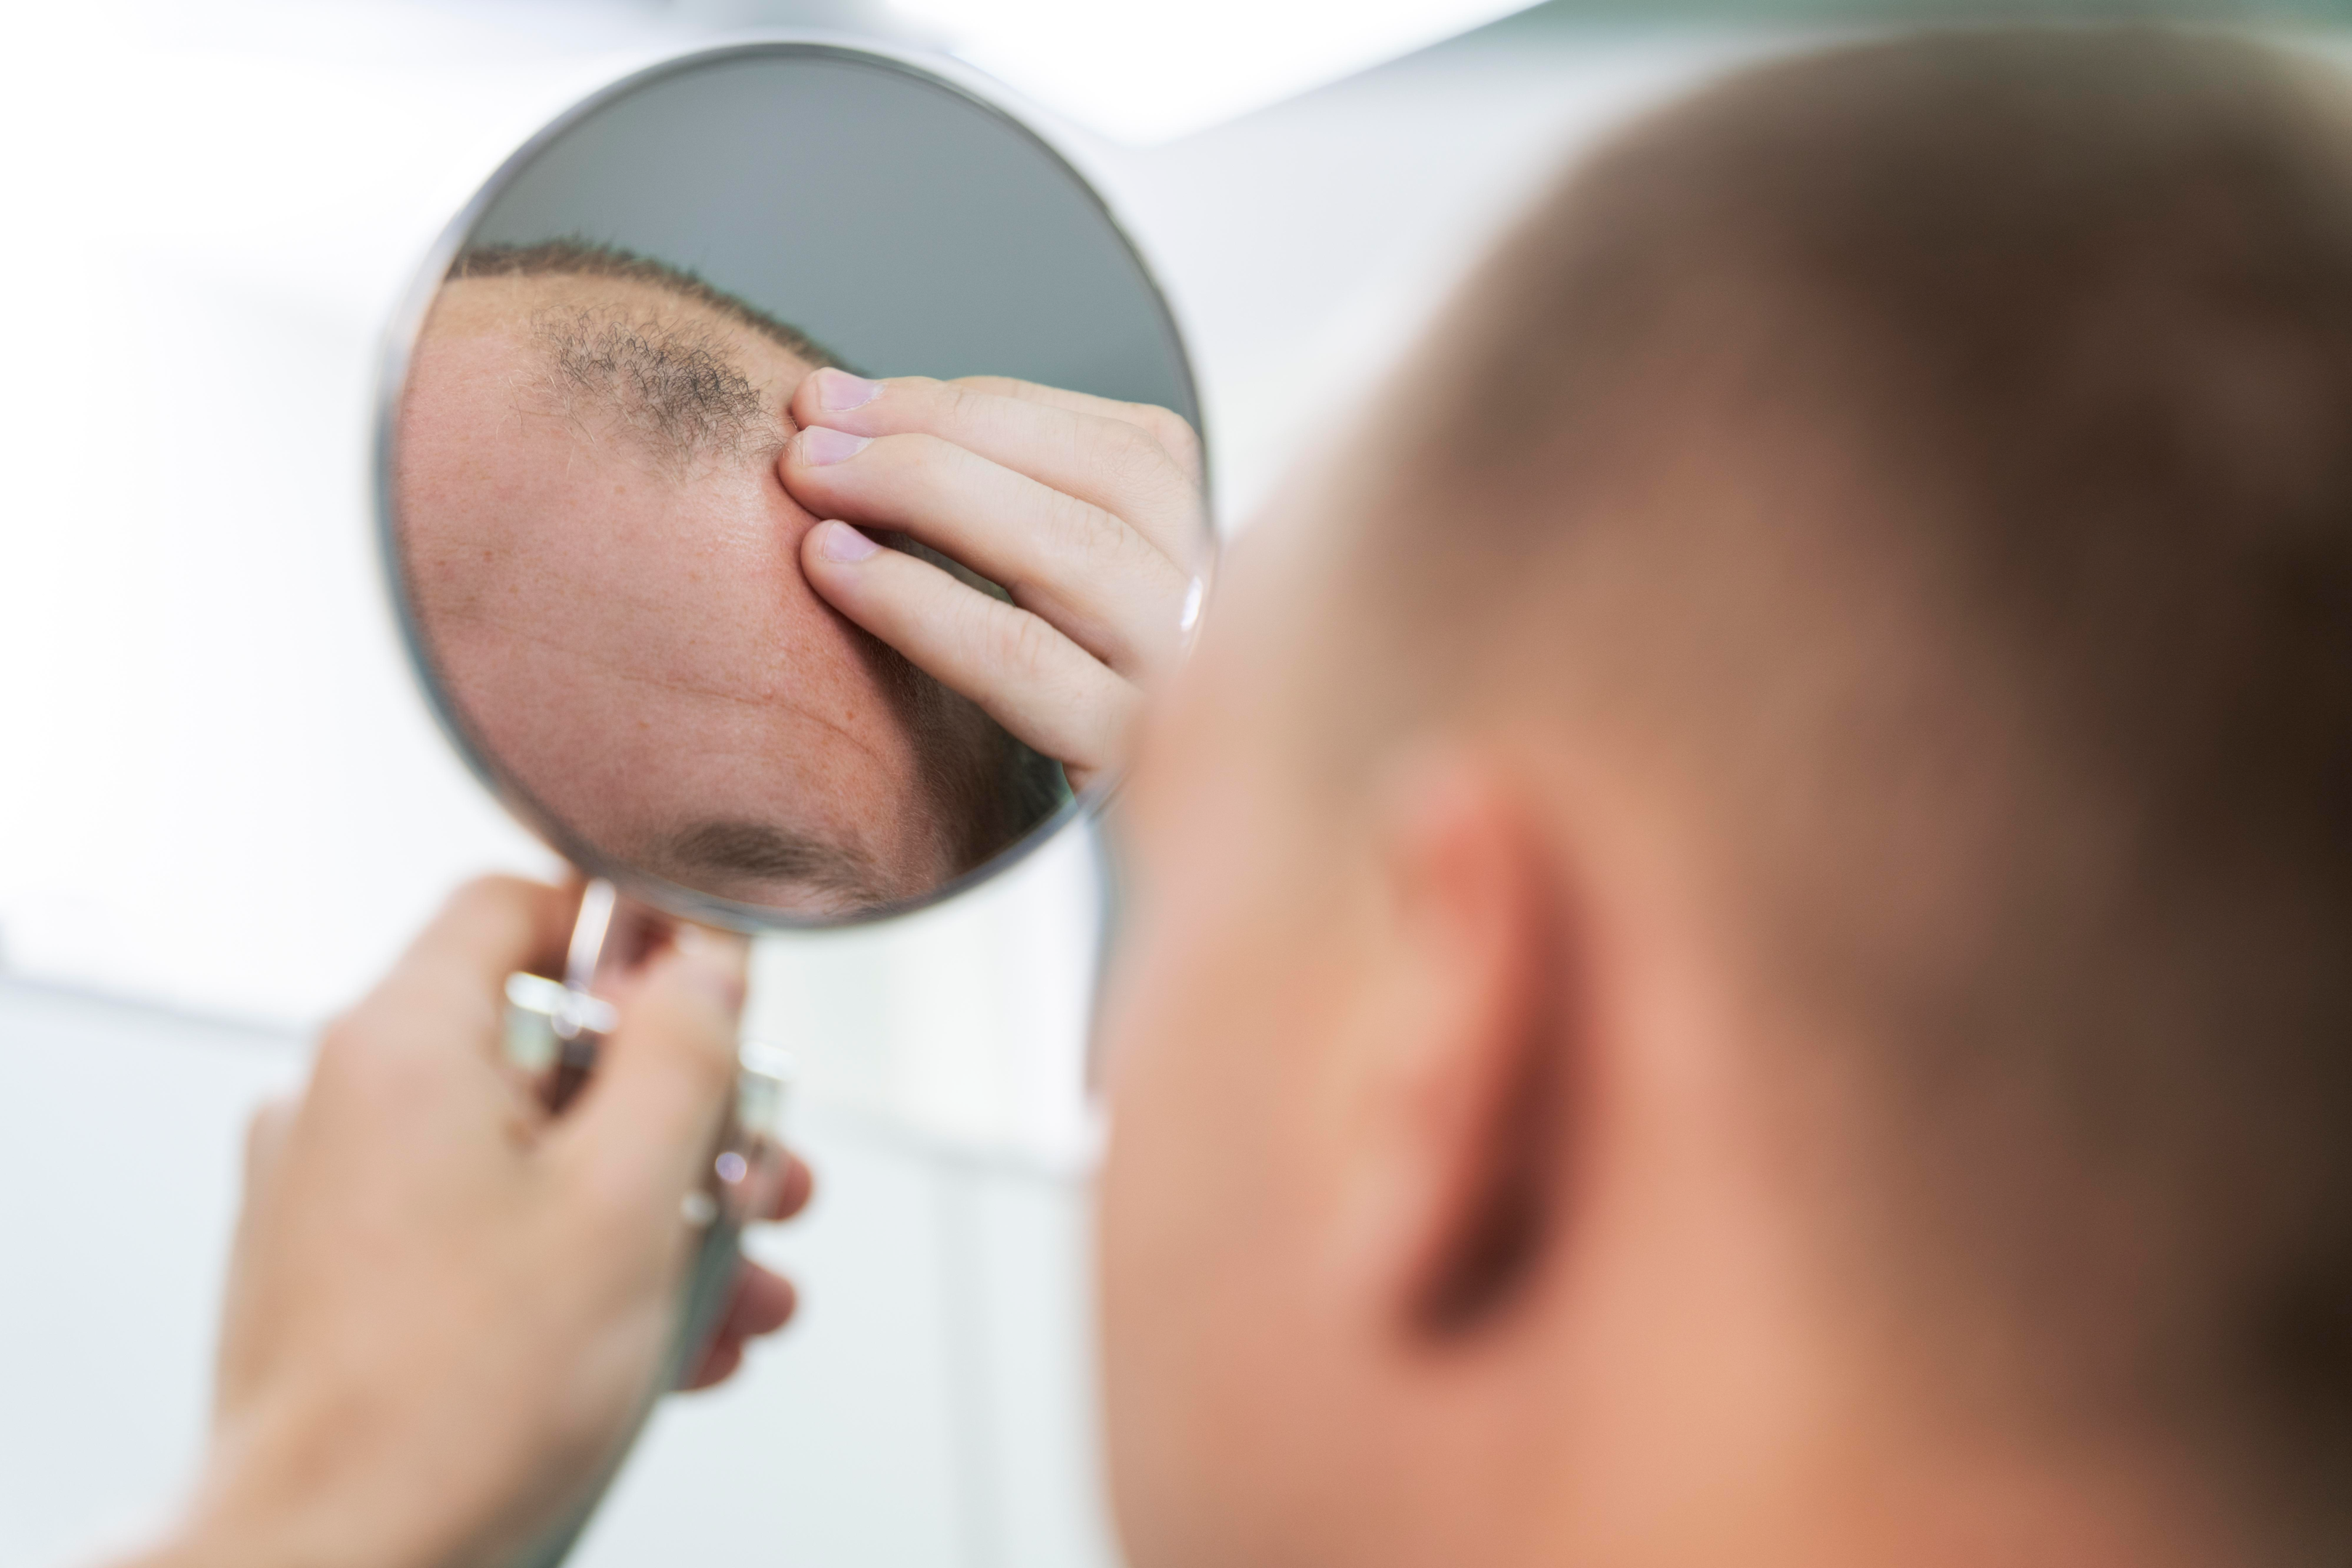 Losing hair very rapidly could be a severe warning sign.